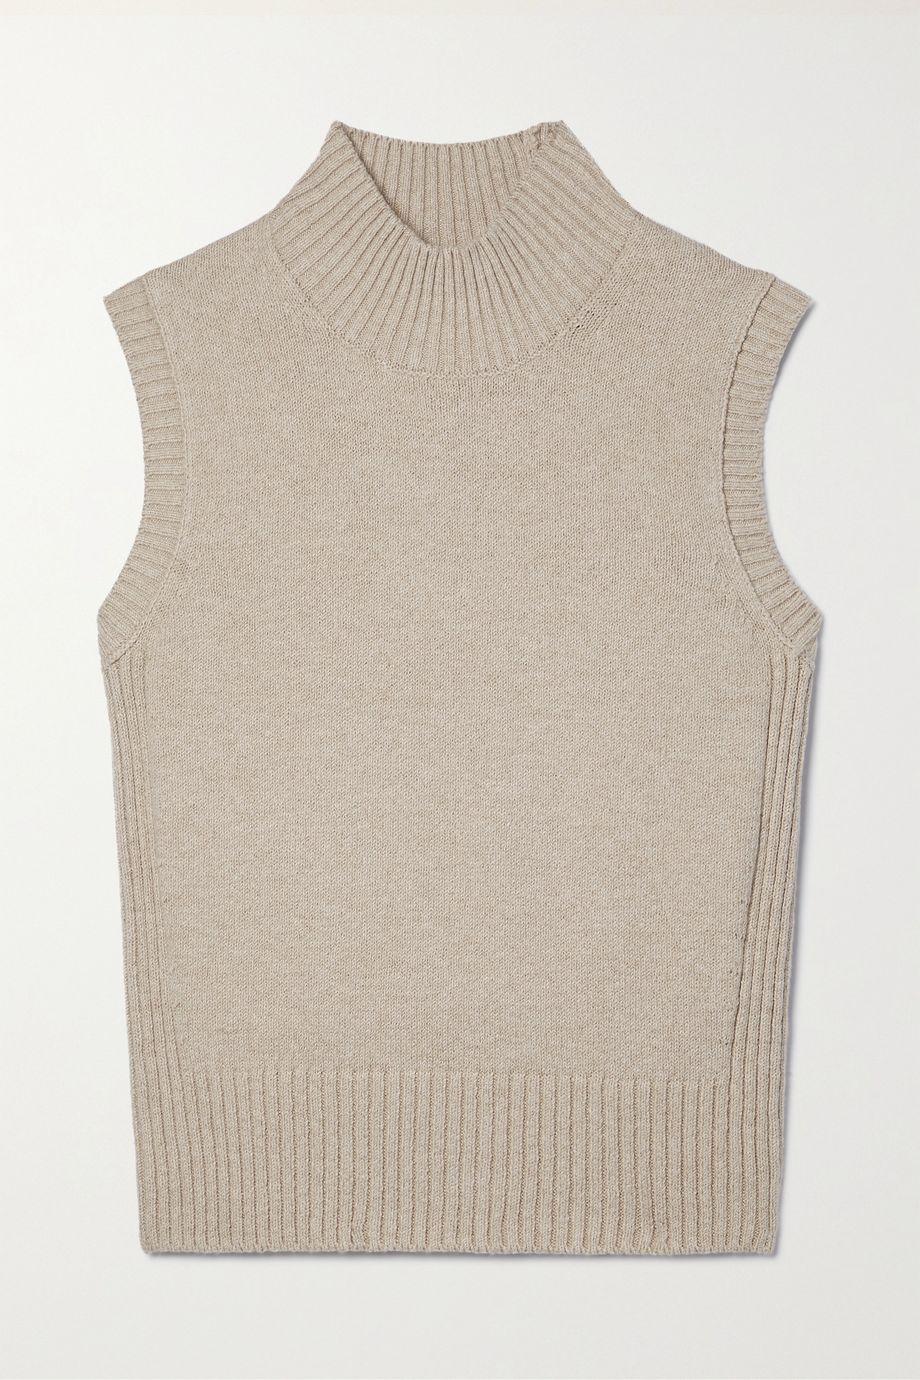 Cotton-blend sweater by ALEX MILL